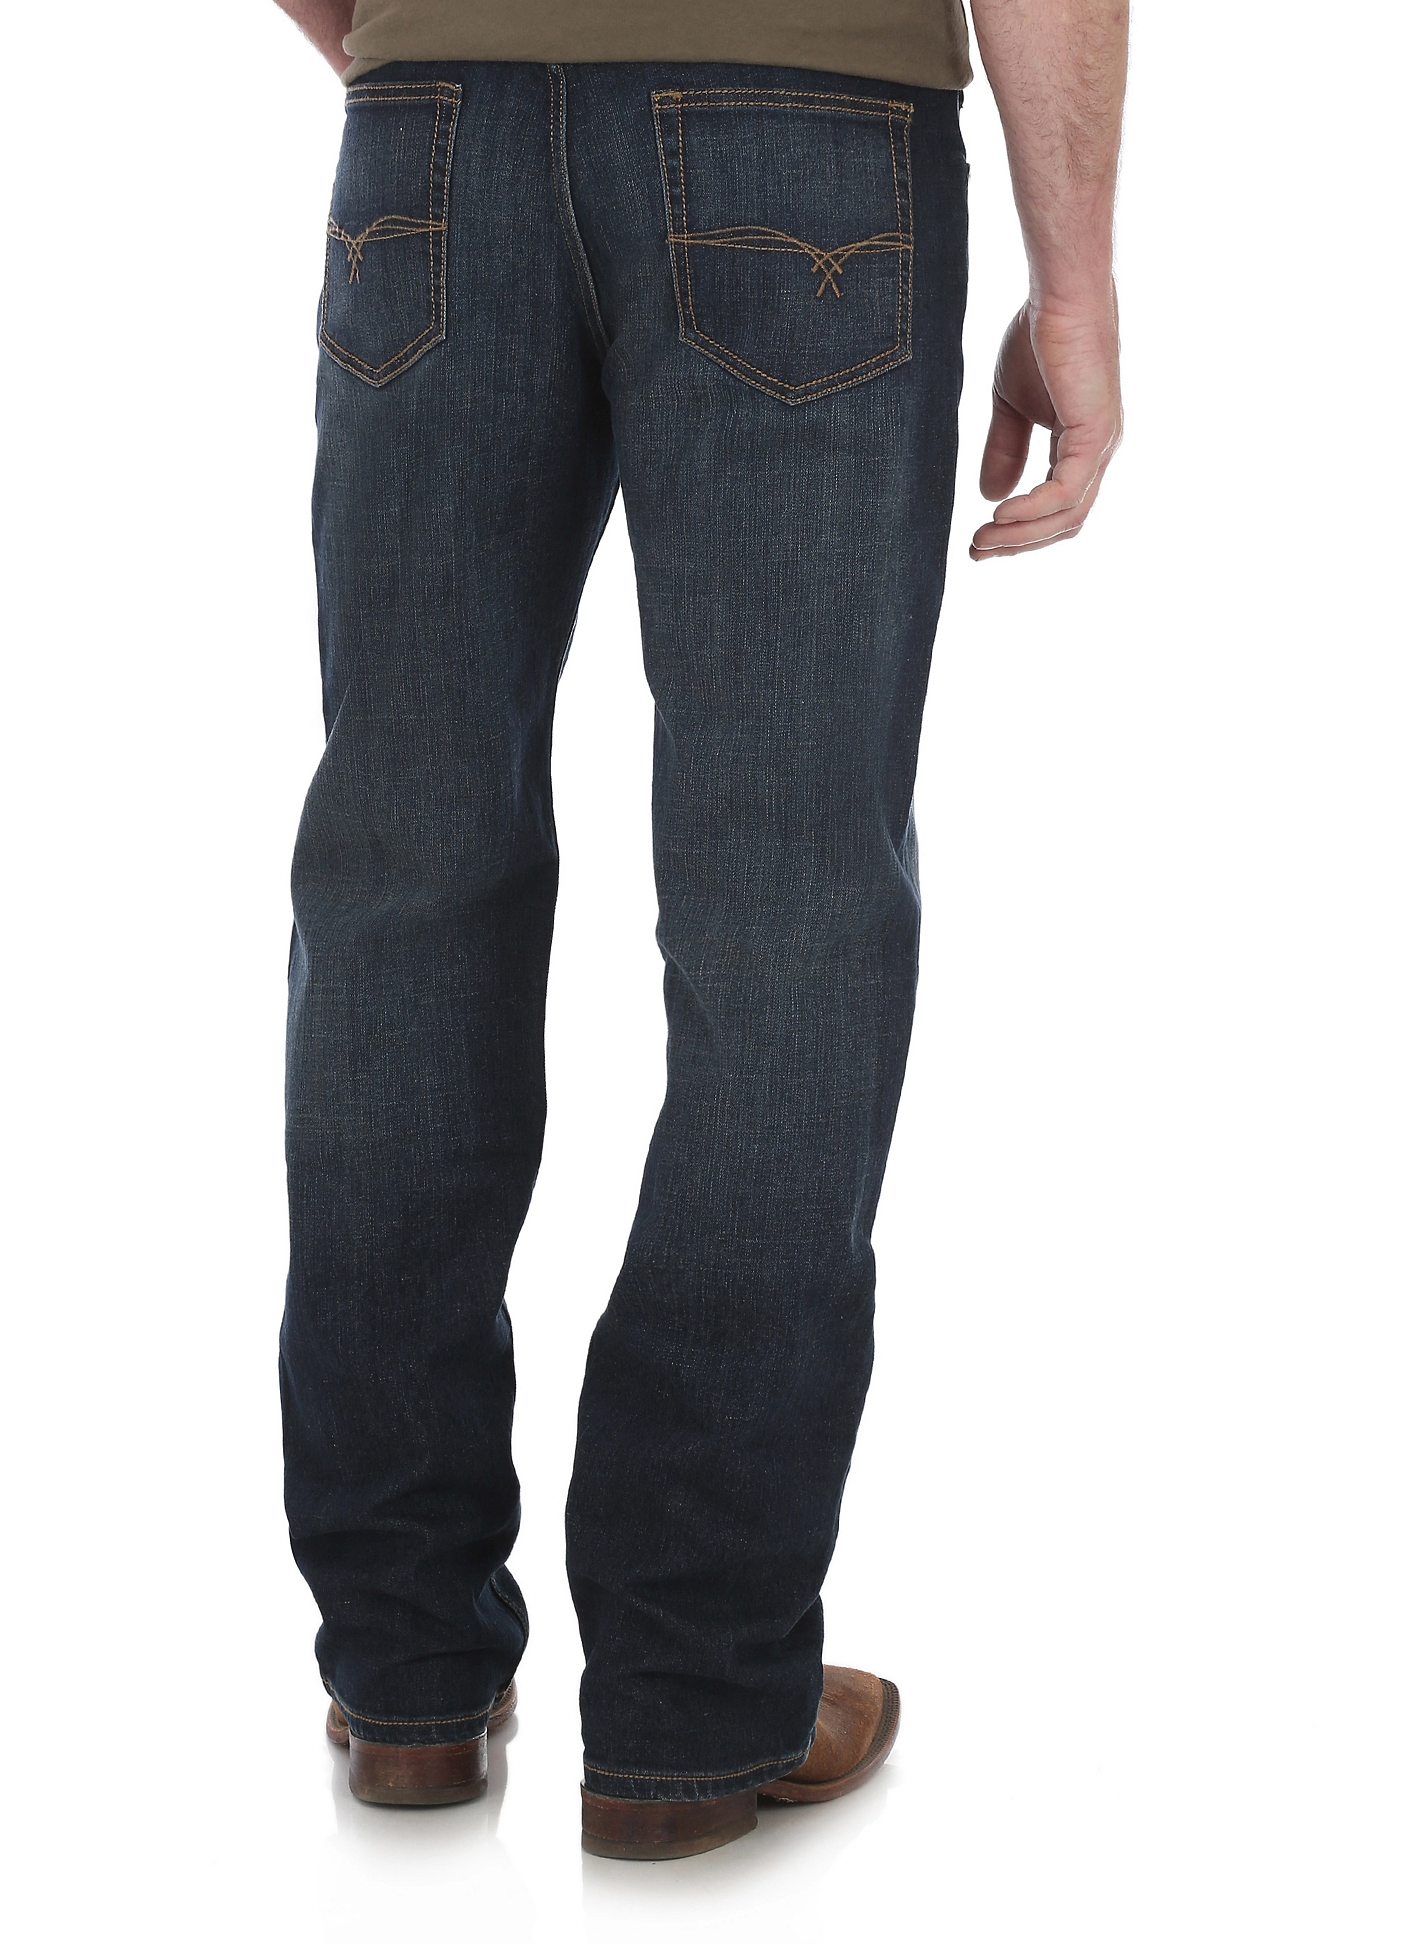 MEN'S WRANGLER 20X NO.33 EXTREME RELAXED FIT JEAN